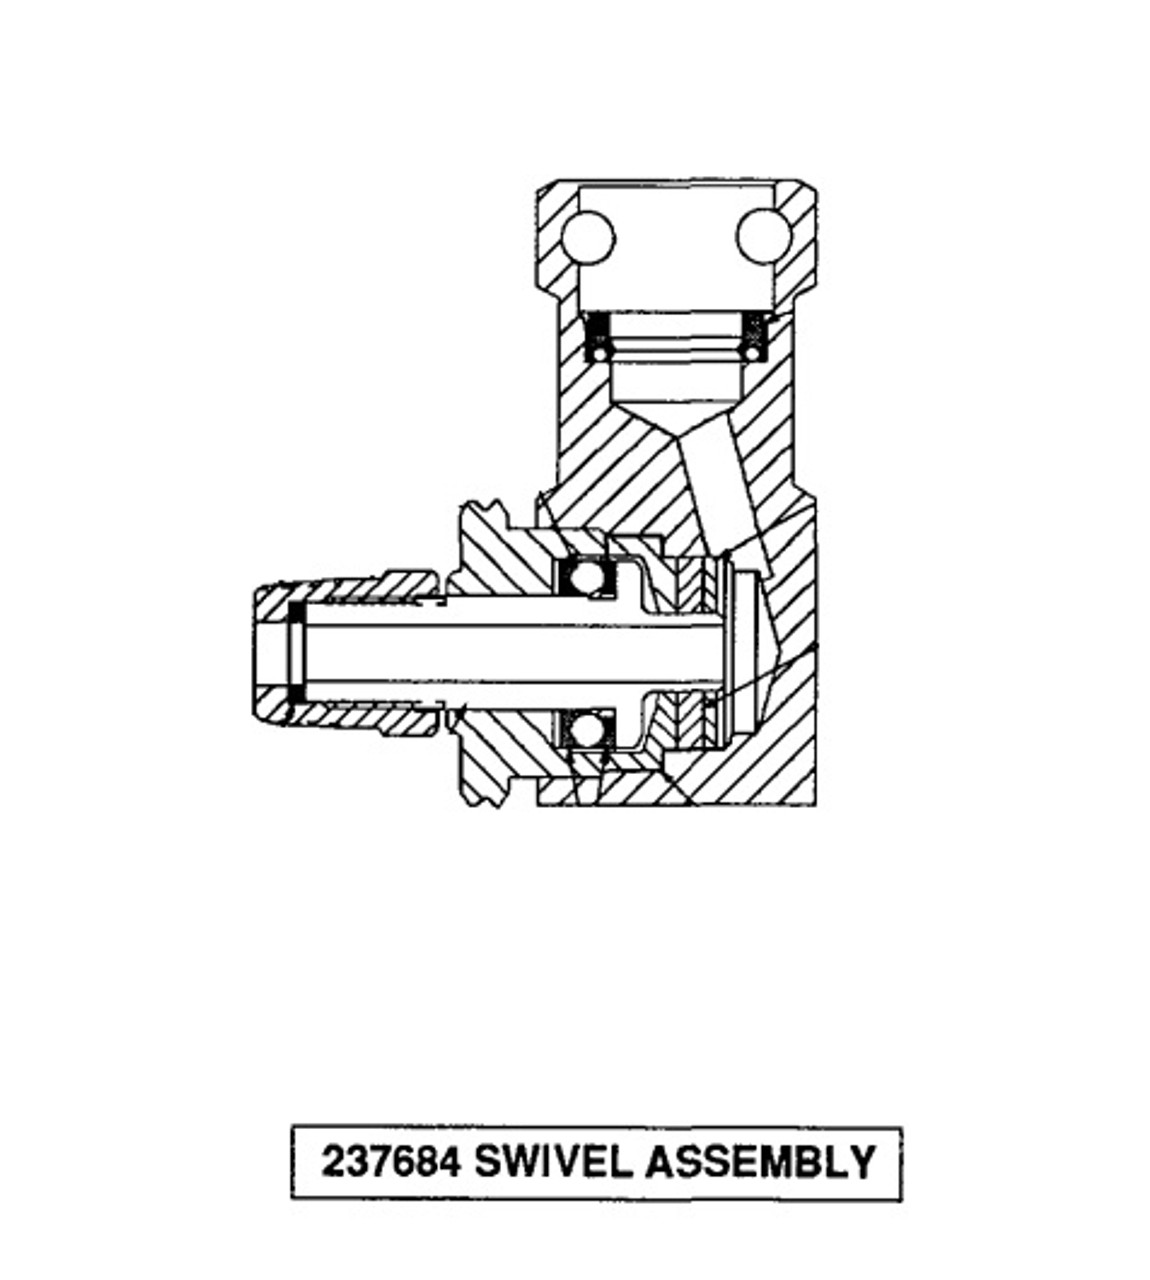 Lincoln Swivel Assembly 237684